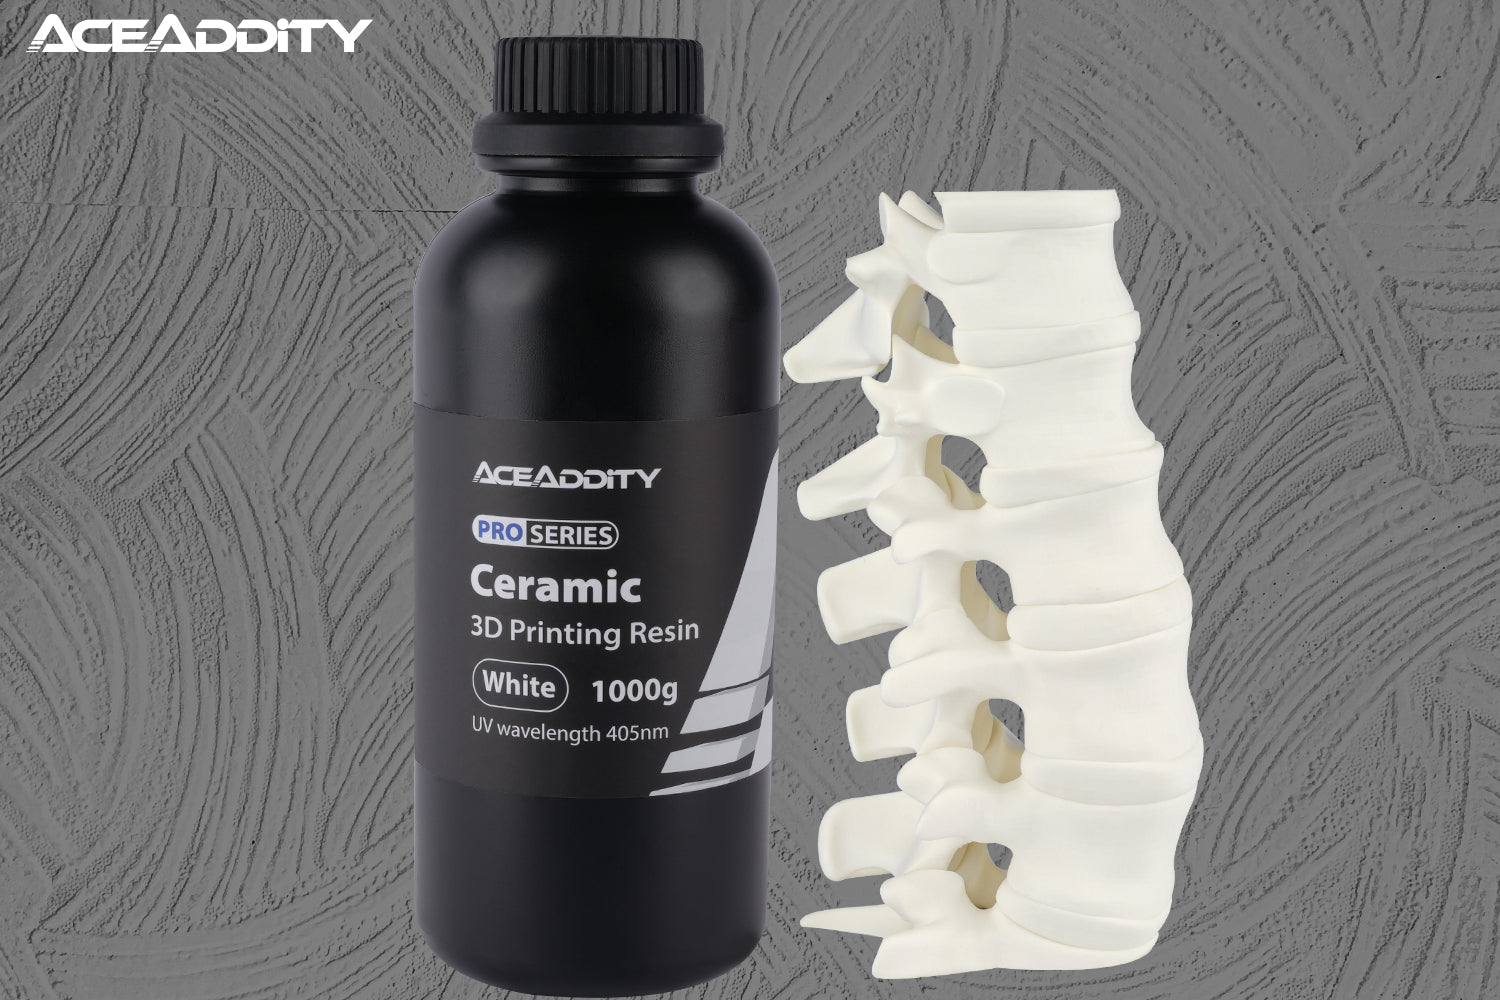 Introducing Aceaddity Ceramic Resin - A New Dimension in 3D Printing